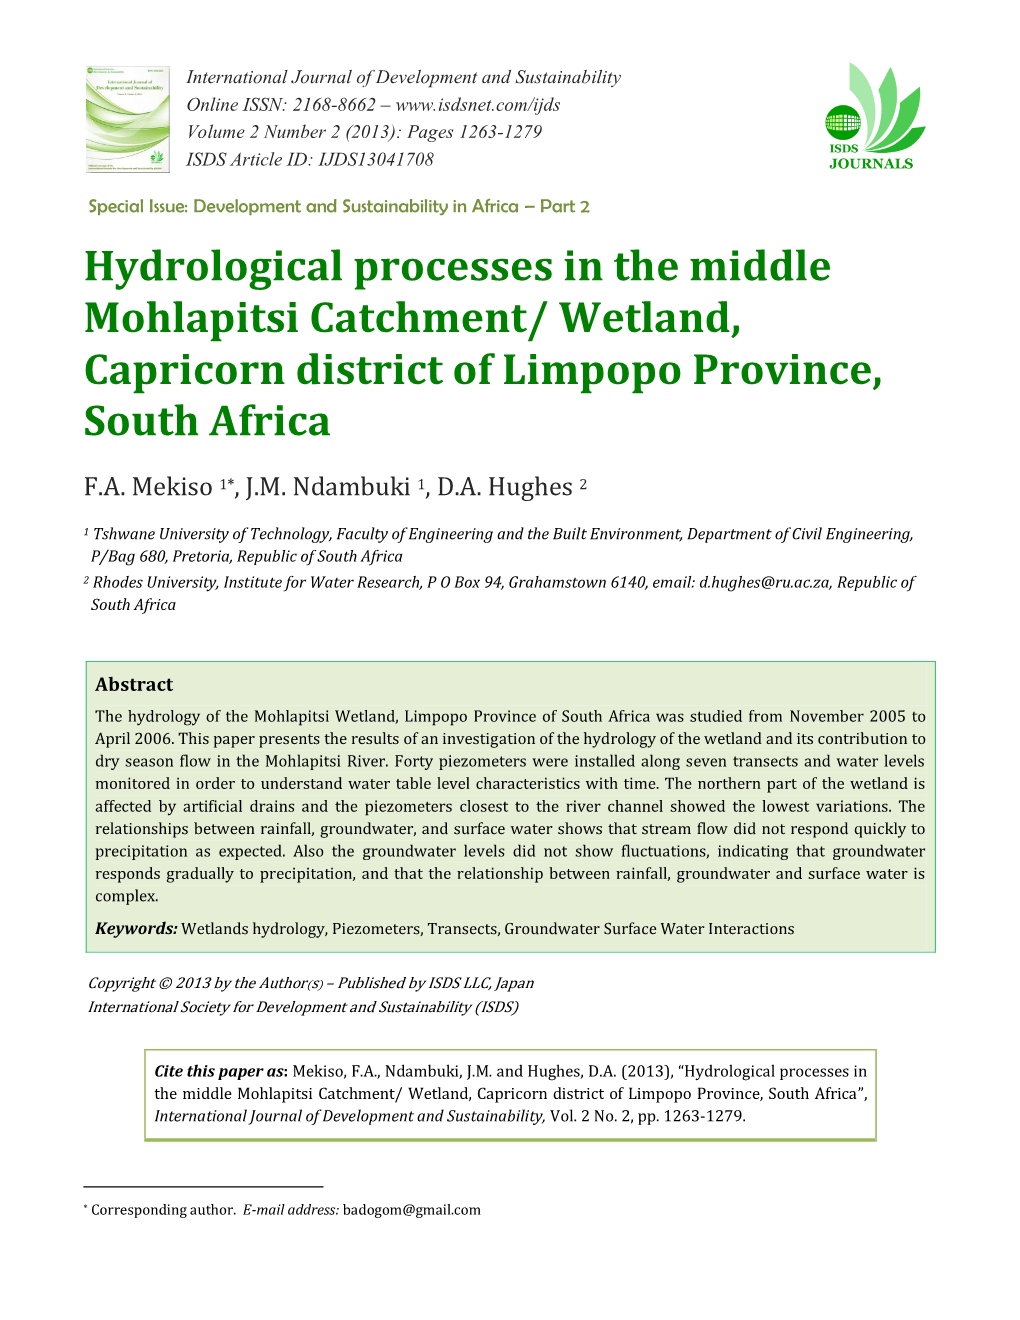 Hydrological Processes in the Middle Mohlapitsi Catchment/ Wetland, Capricorn District of Limpopo Province, South Africa